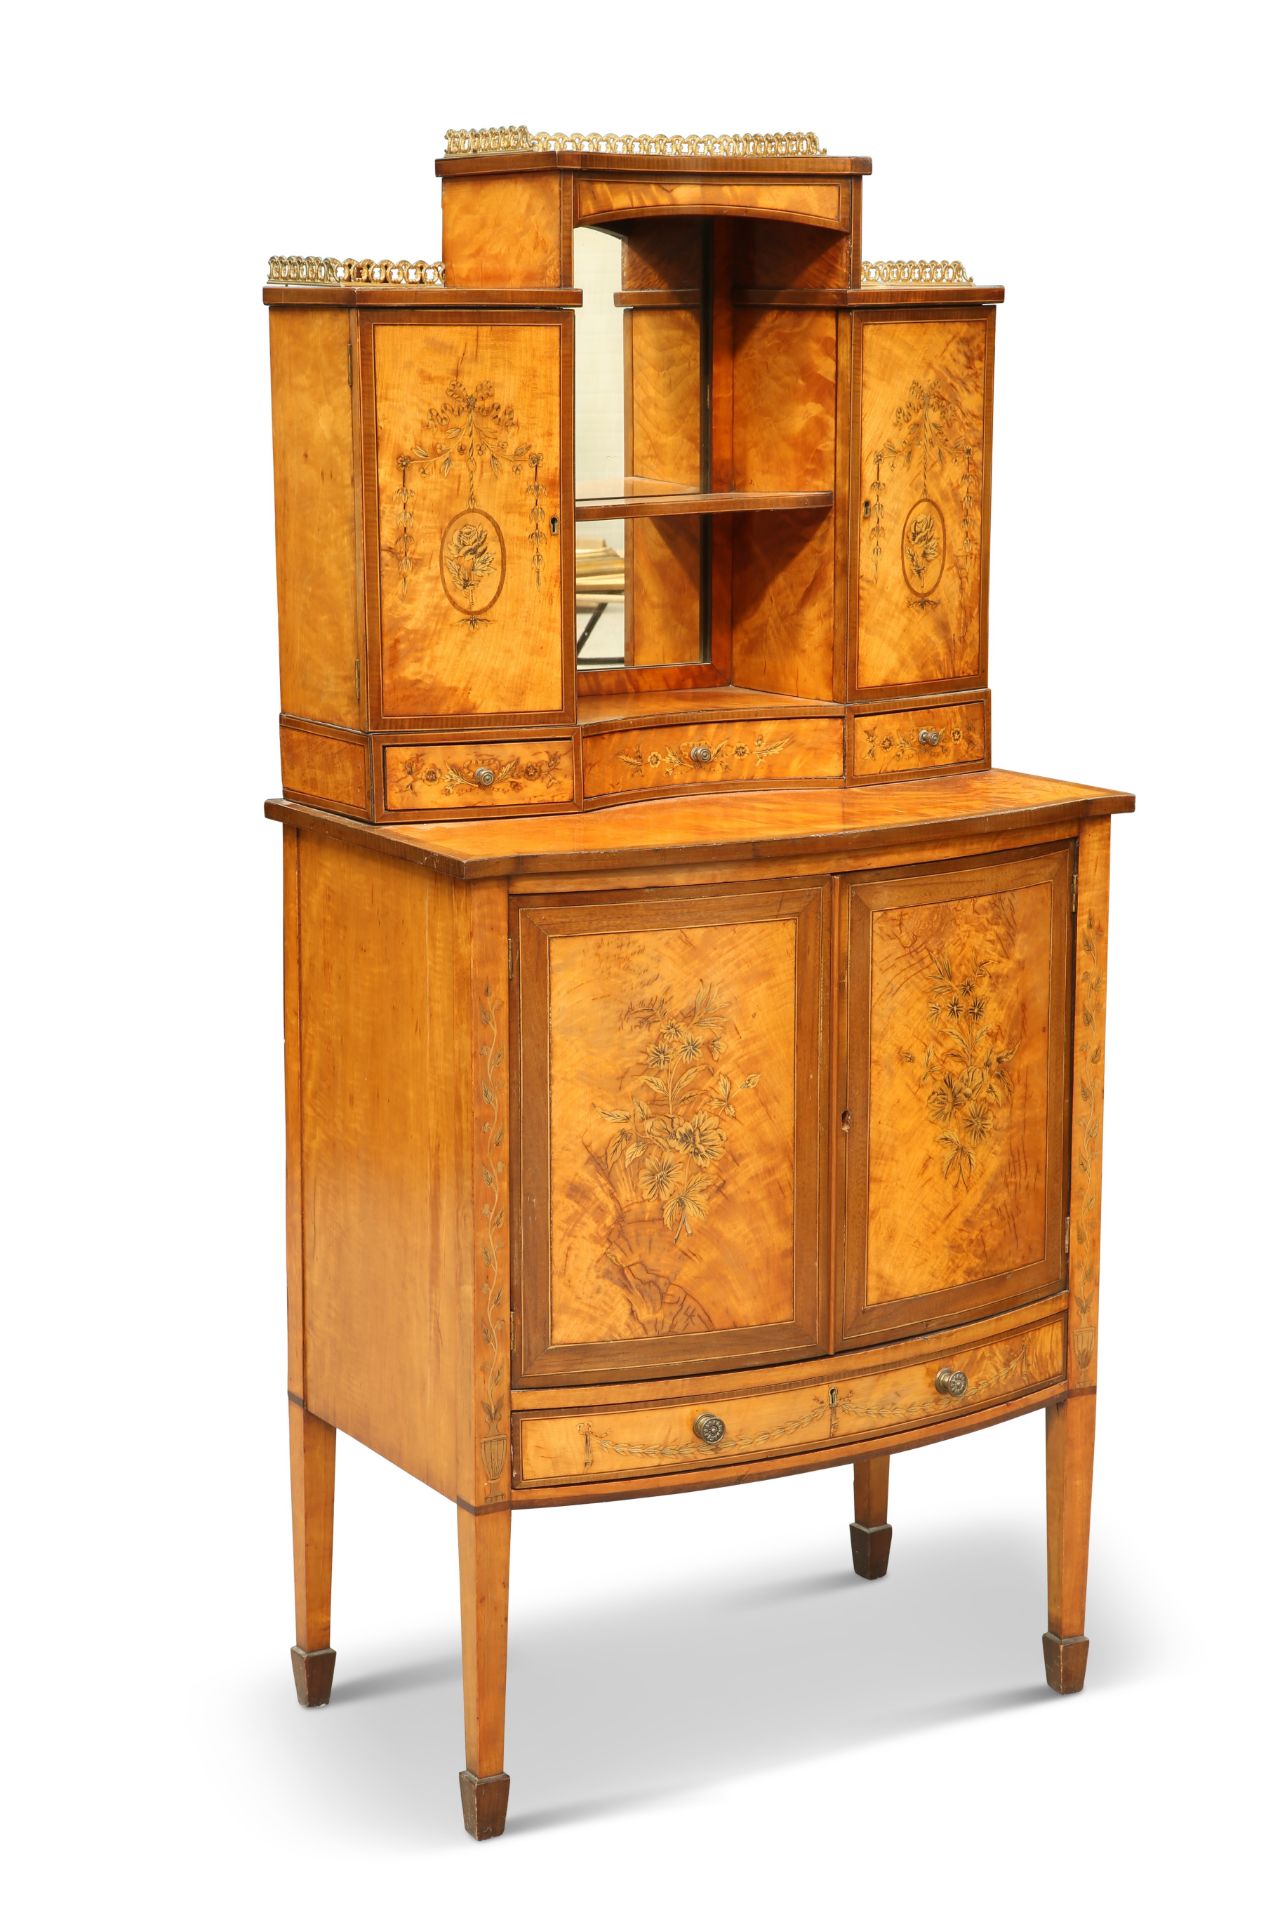 A SHERATON STYLE INLAID SATINWOOD SIDE CABINET, LATE 19TH CENTURY